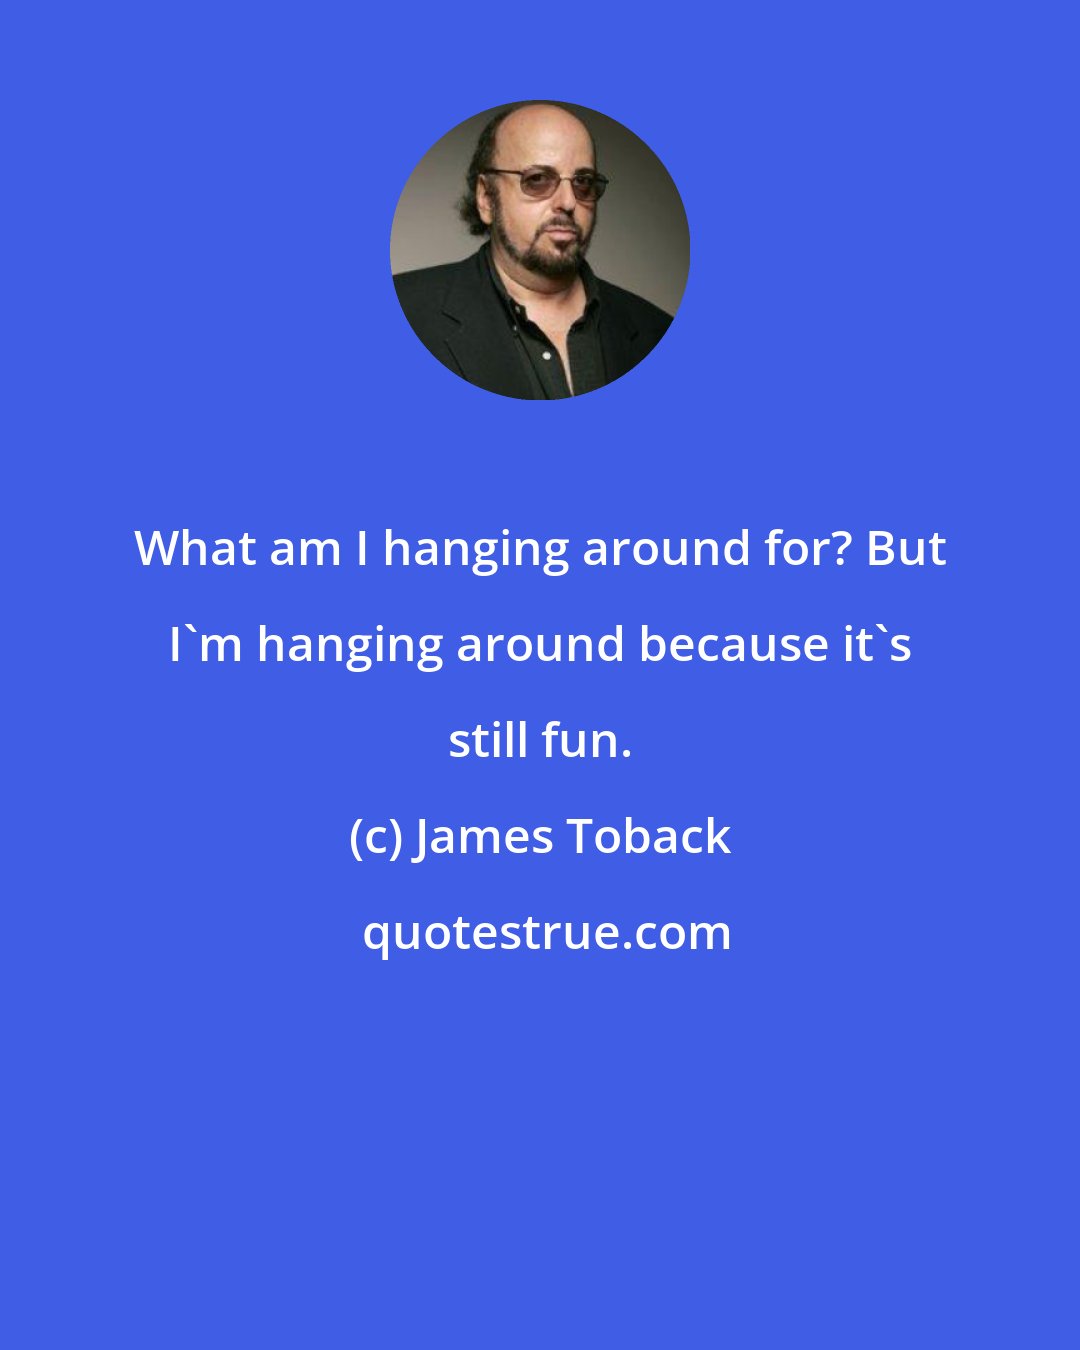 James Toback: What am I hanging around for? But I'm hanging around because it's still fun.